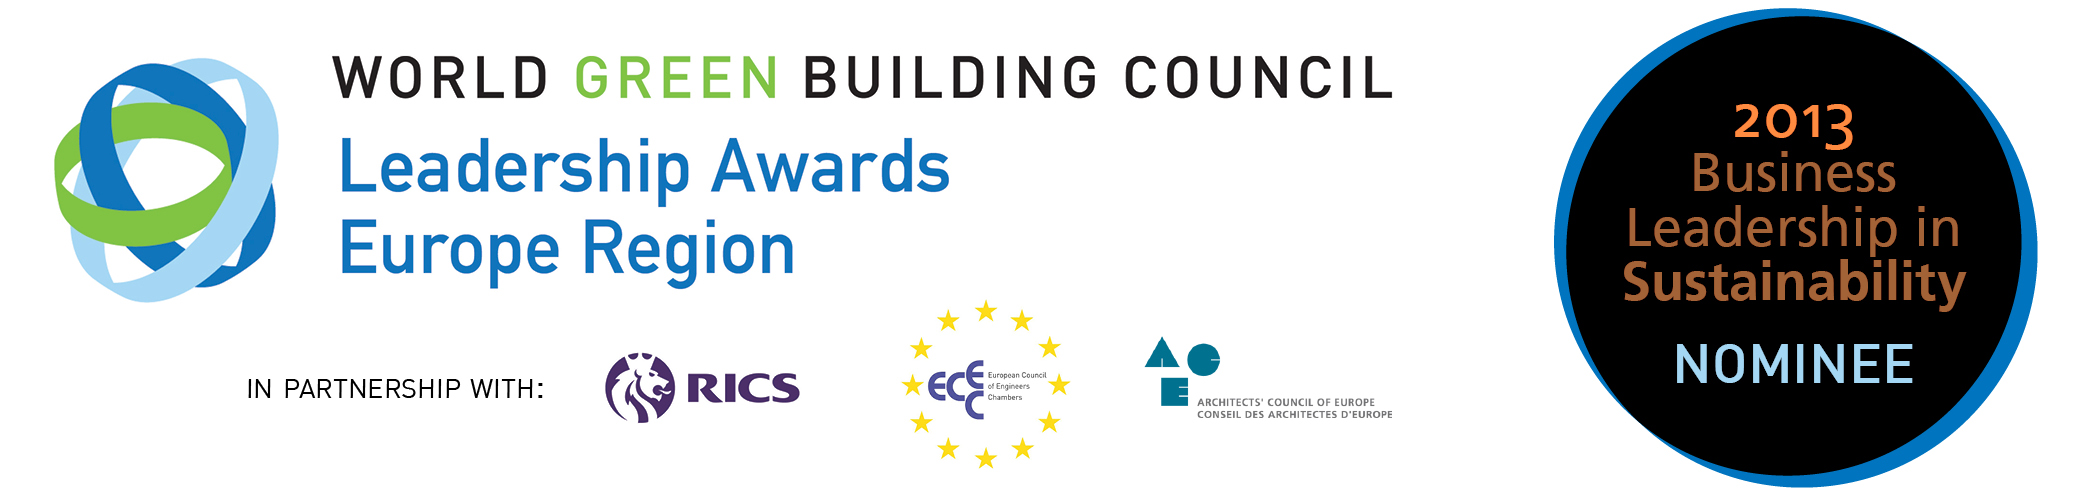 Riko Hiše among the nominees for the Europe Region World Green Building Council Leadership Awards